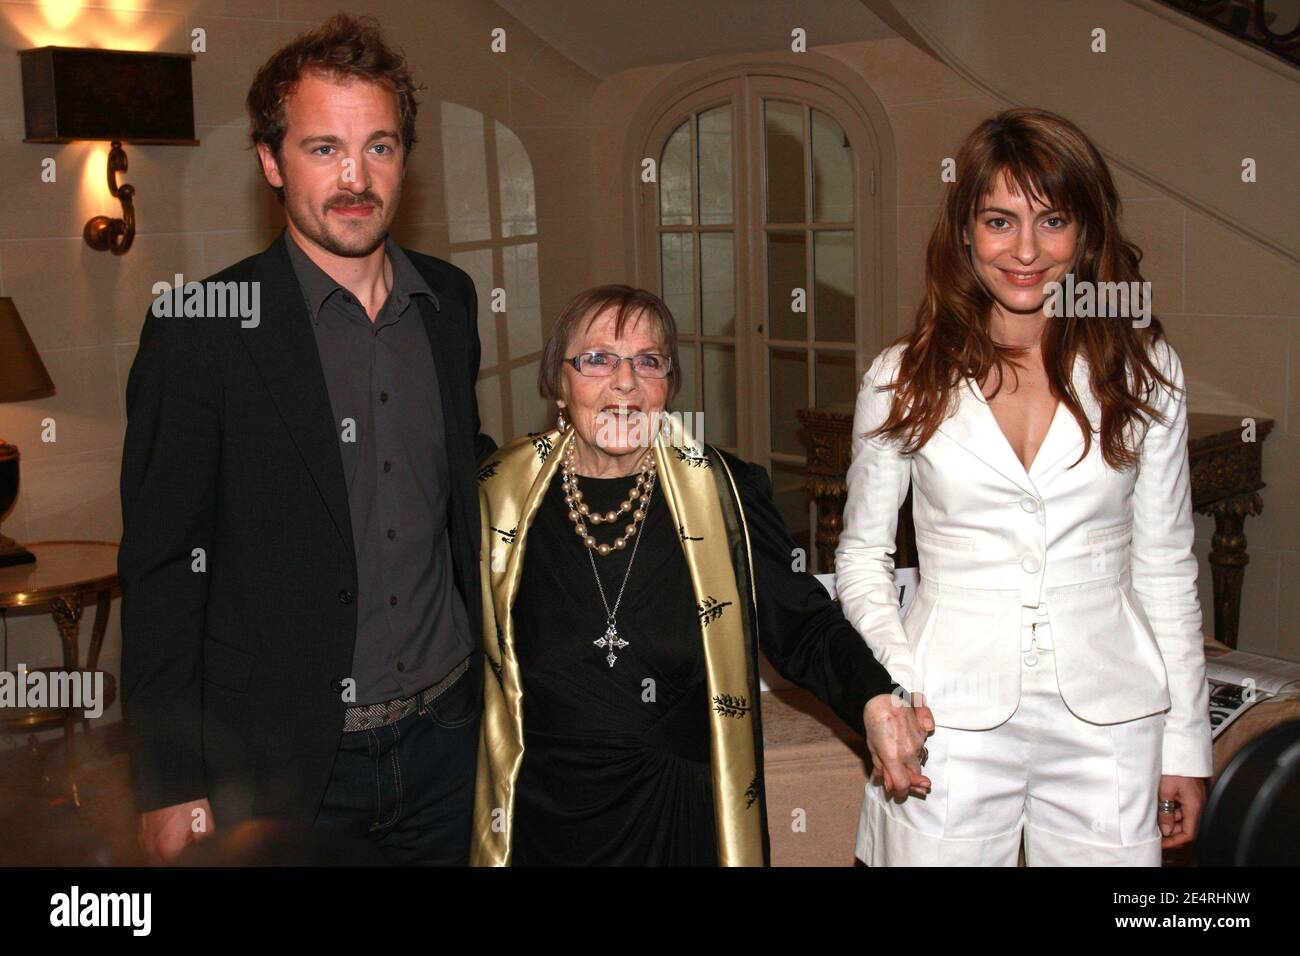 French actors Audrey Dana and Jocelyn Quivrin, winners of cinema prize 'Prix Romy Schneider-Patrick Dewaere 2008' meet with Patrick Dewaere's mother Mado Maurin inside Royal Monceau Hotel in Paris, France on March 17, 2008 prior to the official award ceremony. Photo by Benoit Pinguet/ABACAPRESS.COM Stock Photo